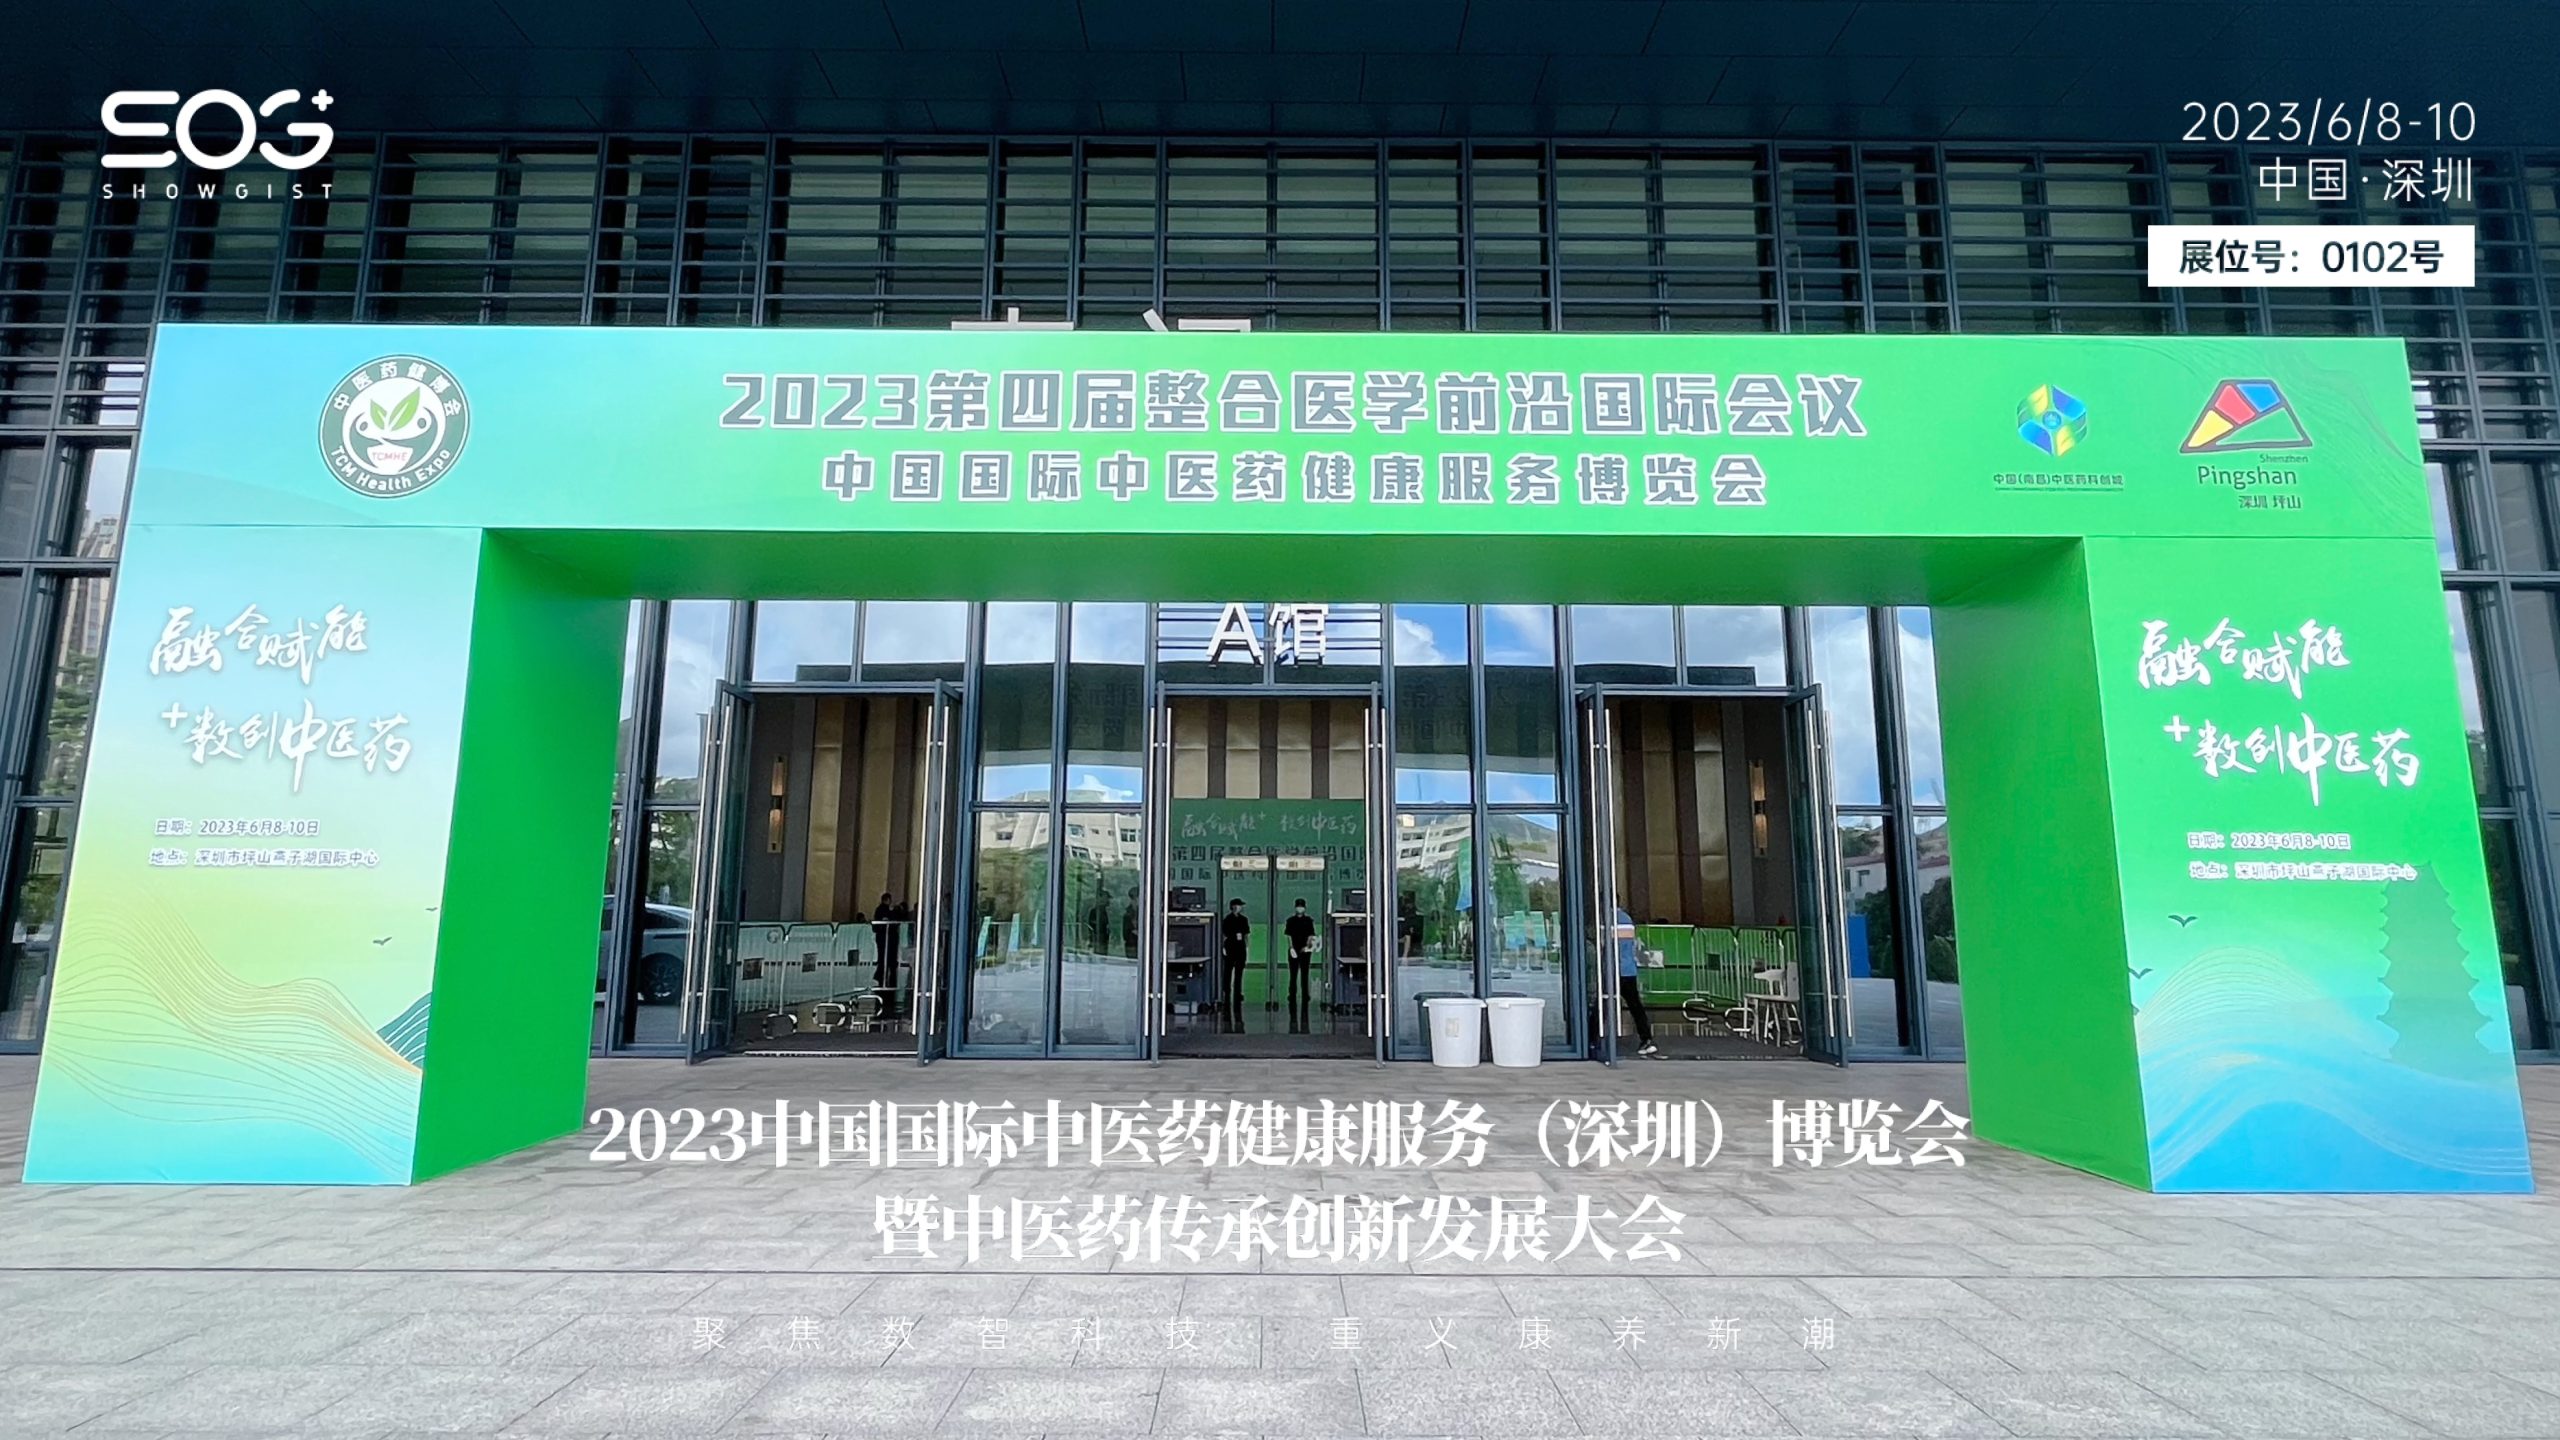 SOG Appears at the 2023 China International Traditional Chinese Medicine Health Services (Shenzhen) Expo